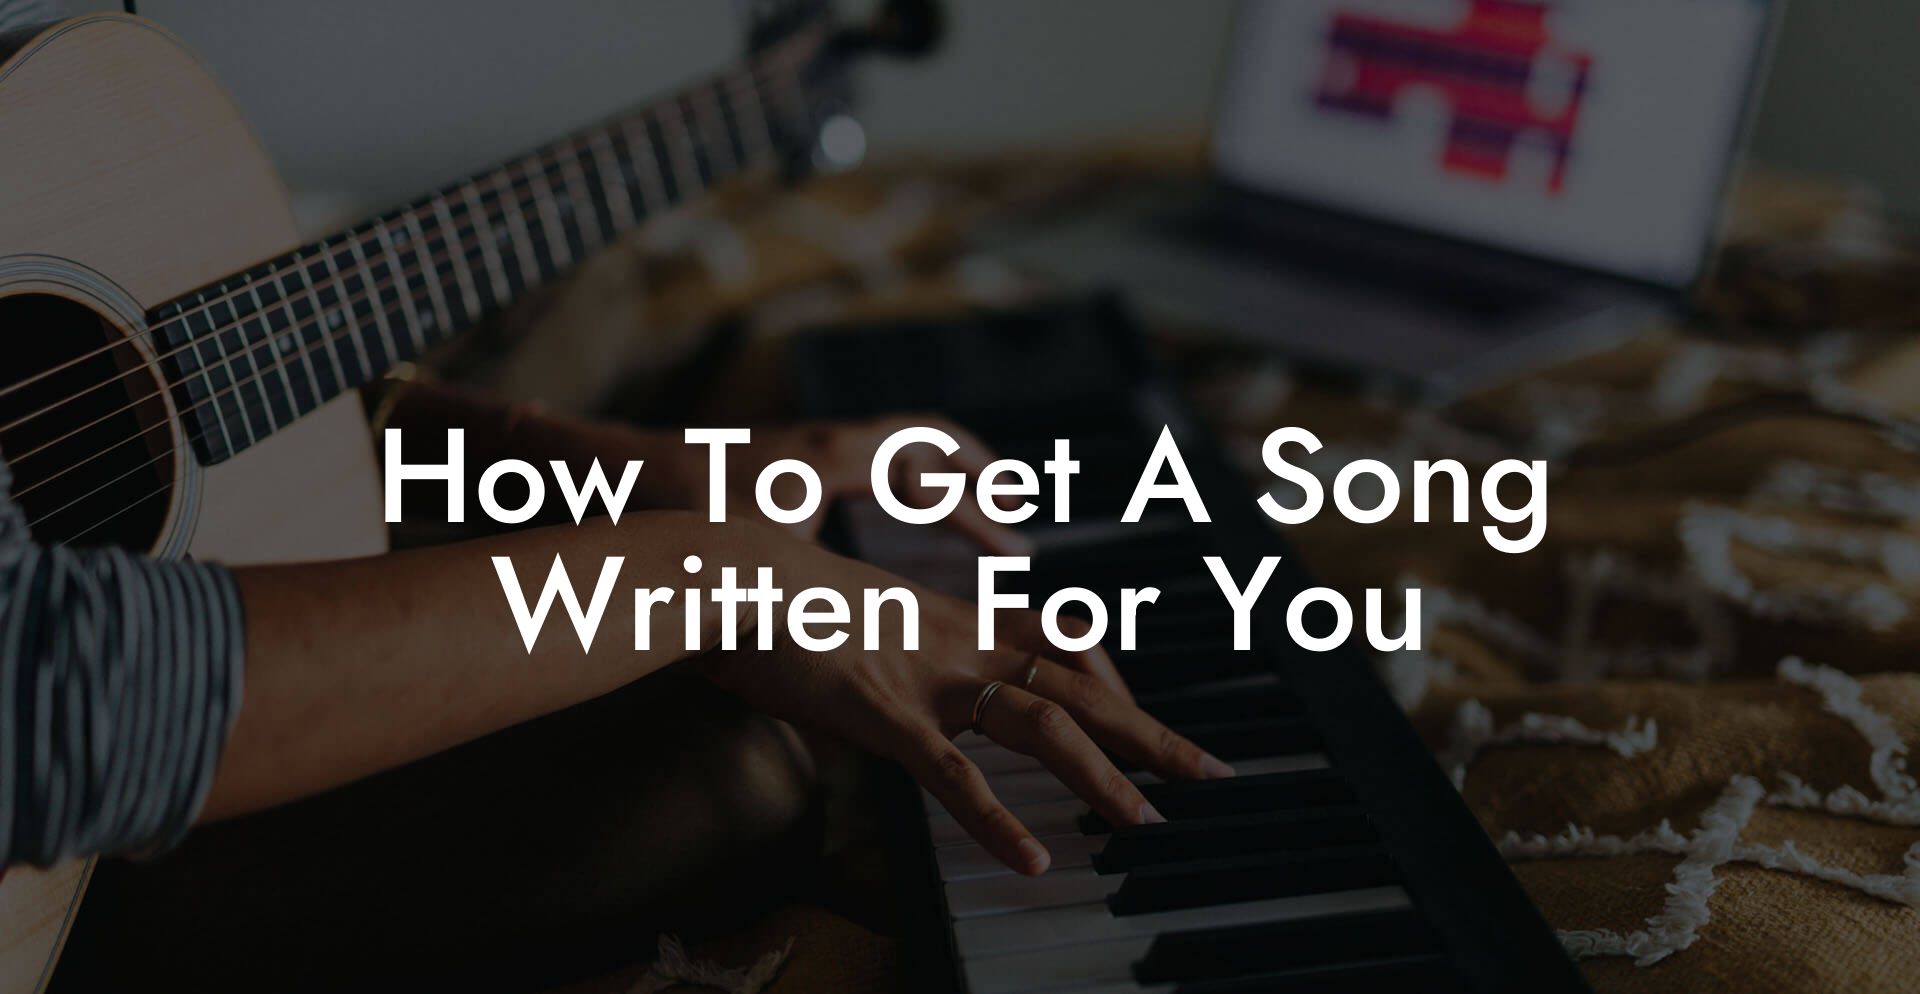 how to get a song written for you lyric assistant